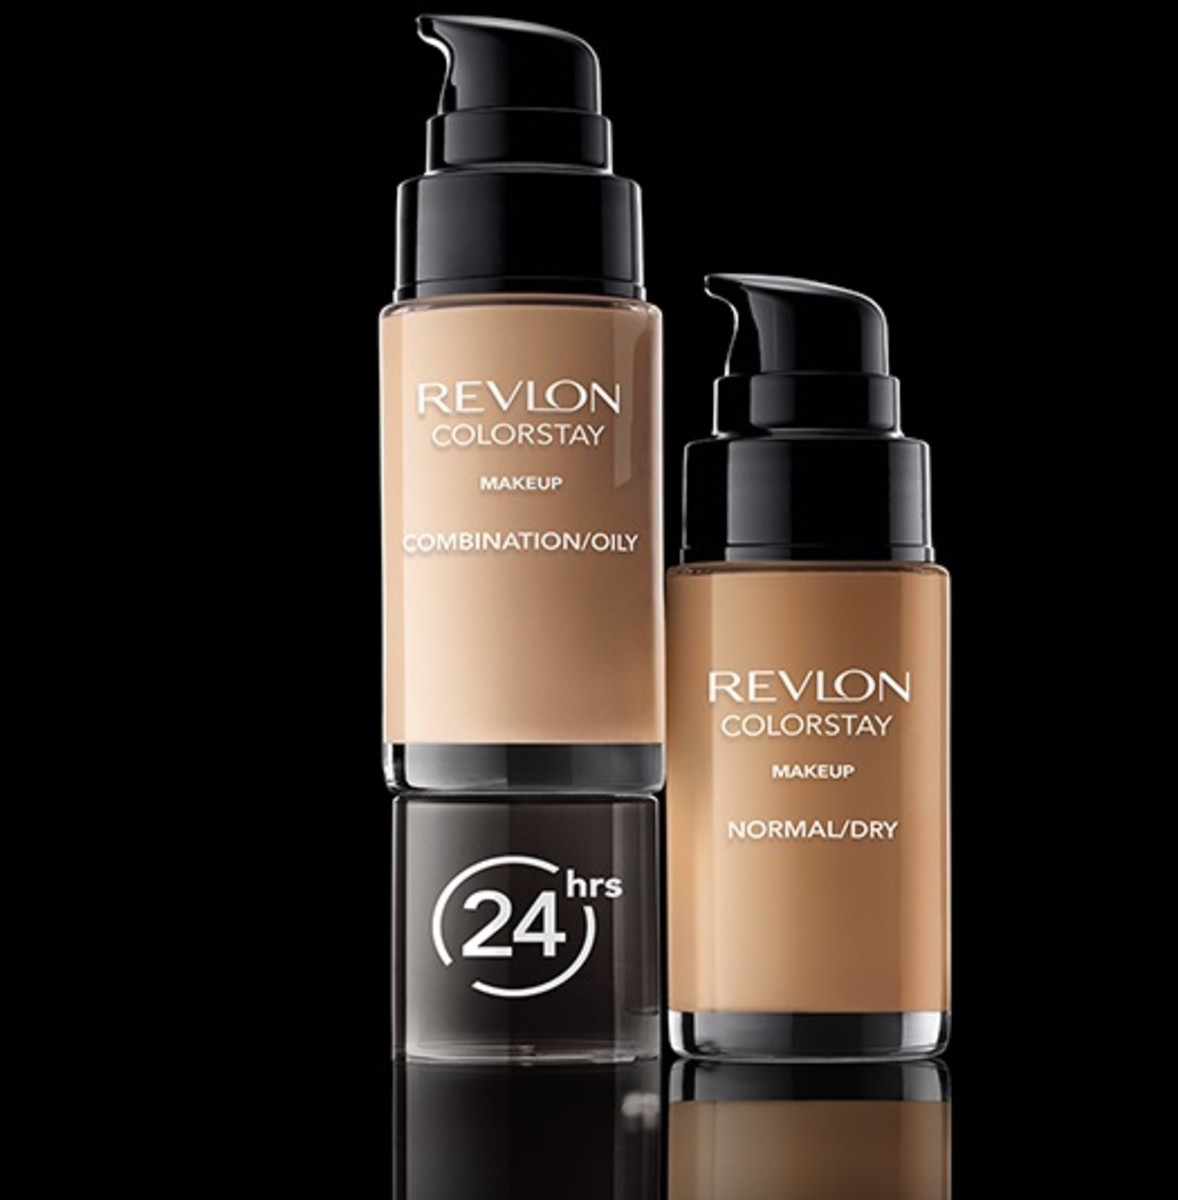 Revlon Colorstay Foundation may be a bit heavy without adding moisturizer, but it's affordable and stays on for up to 10 hours.